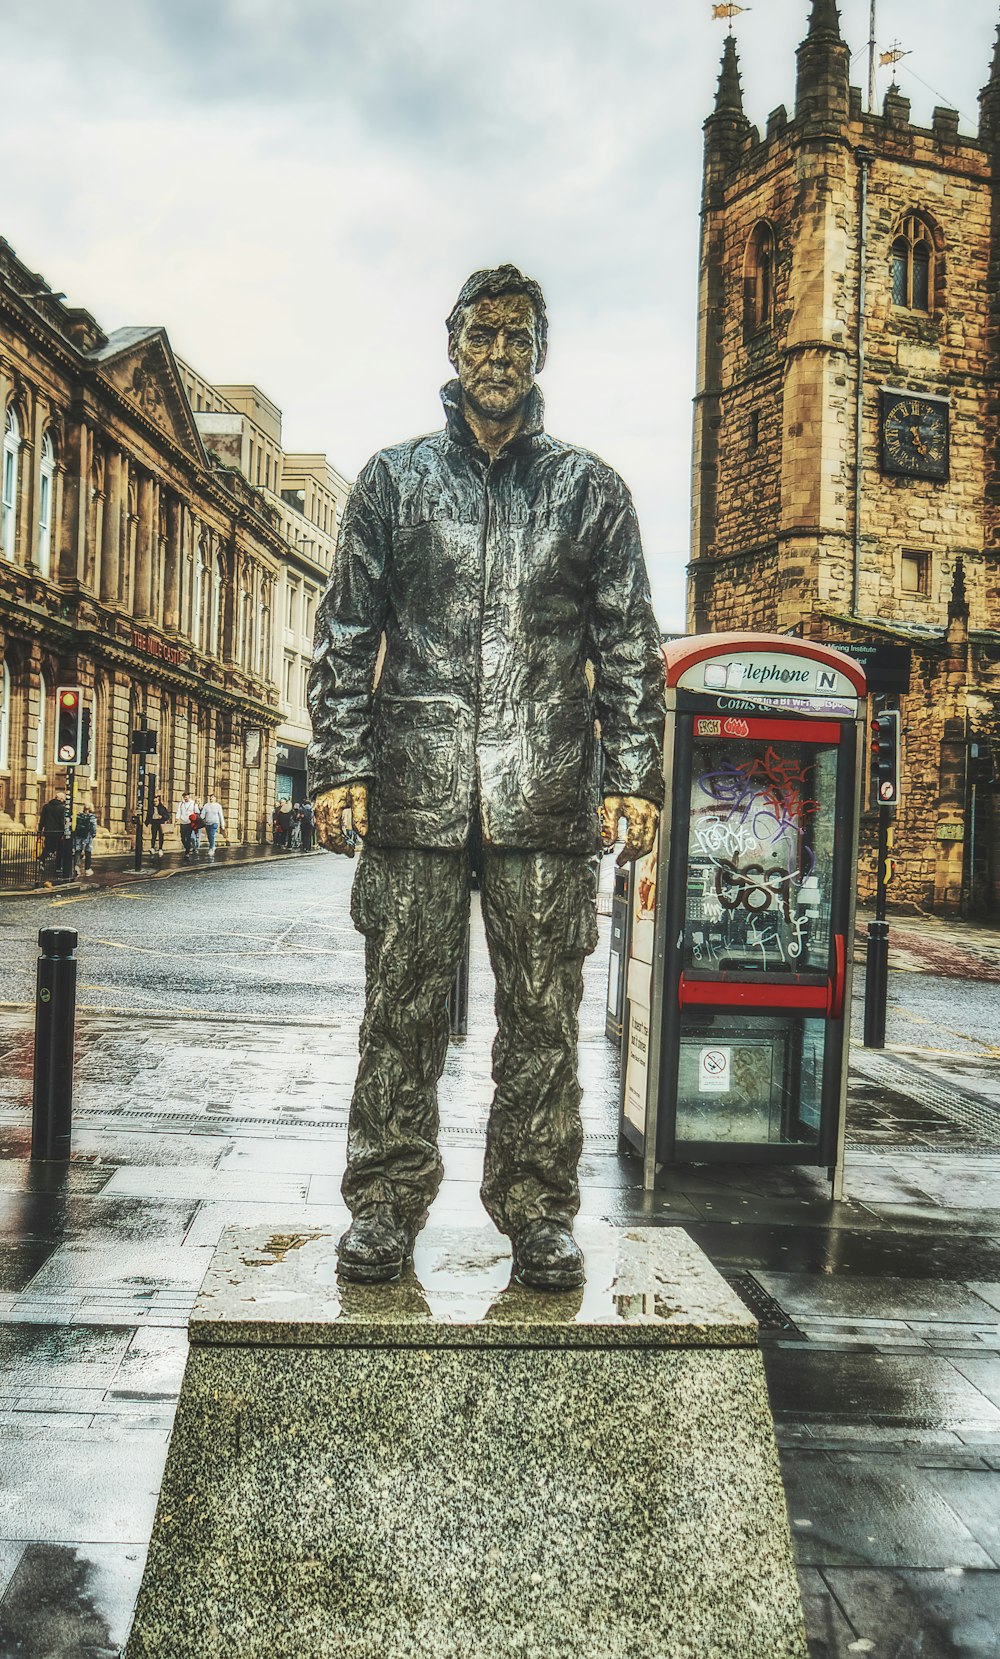 a statue of a man standing next to a phone booth